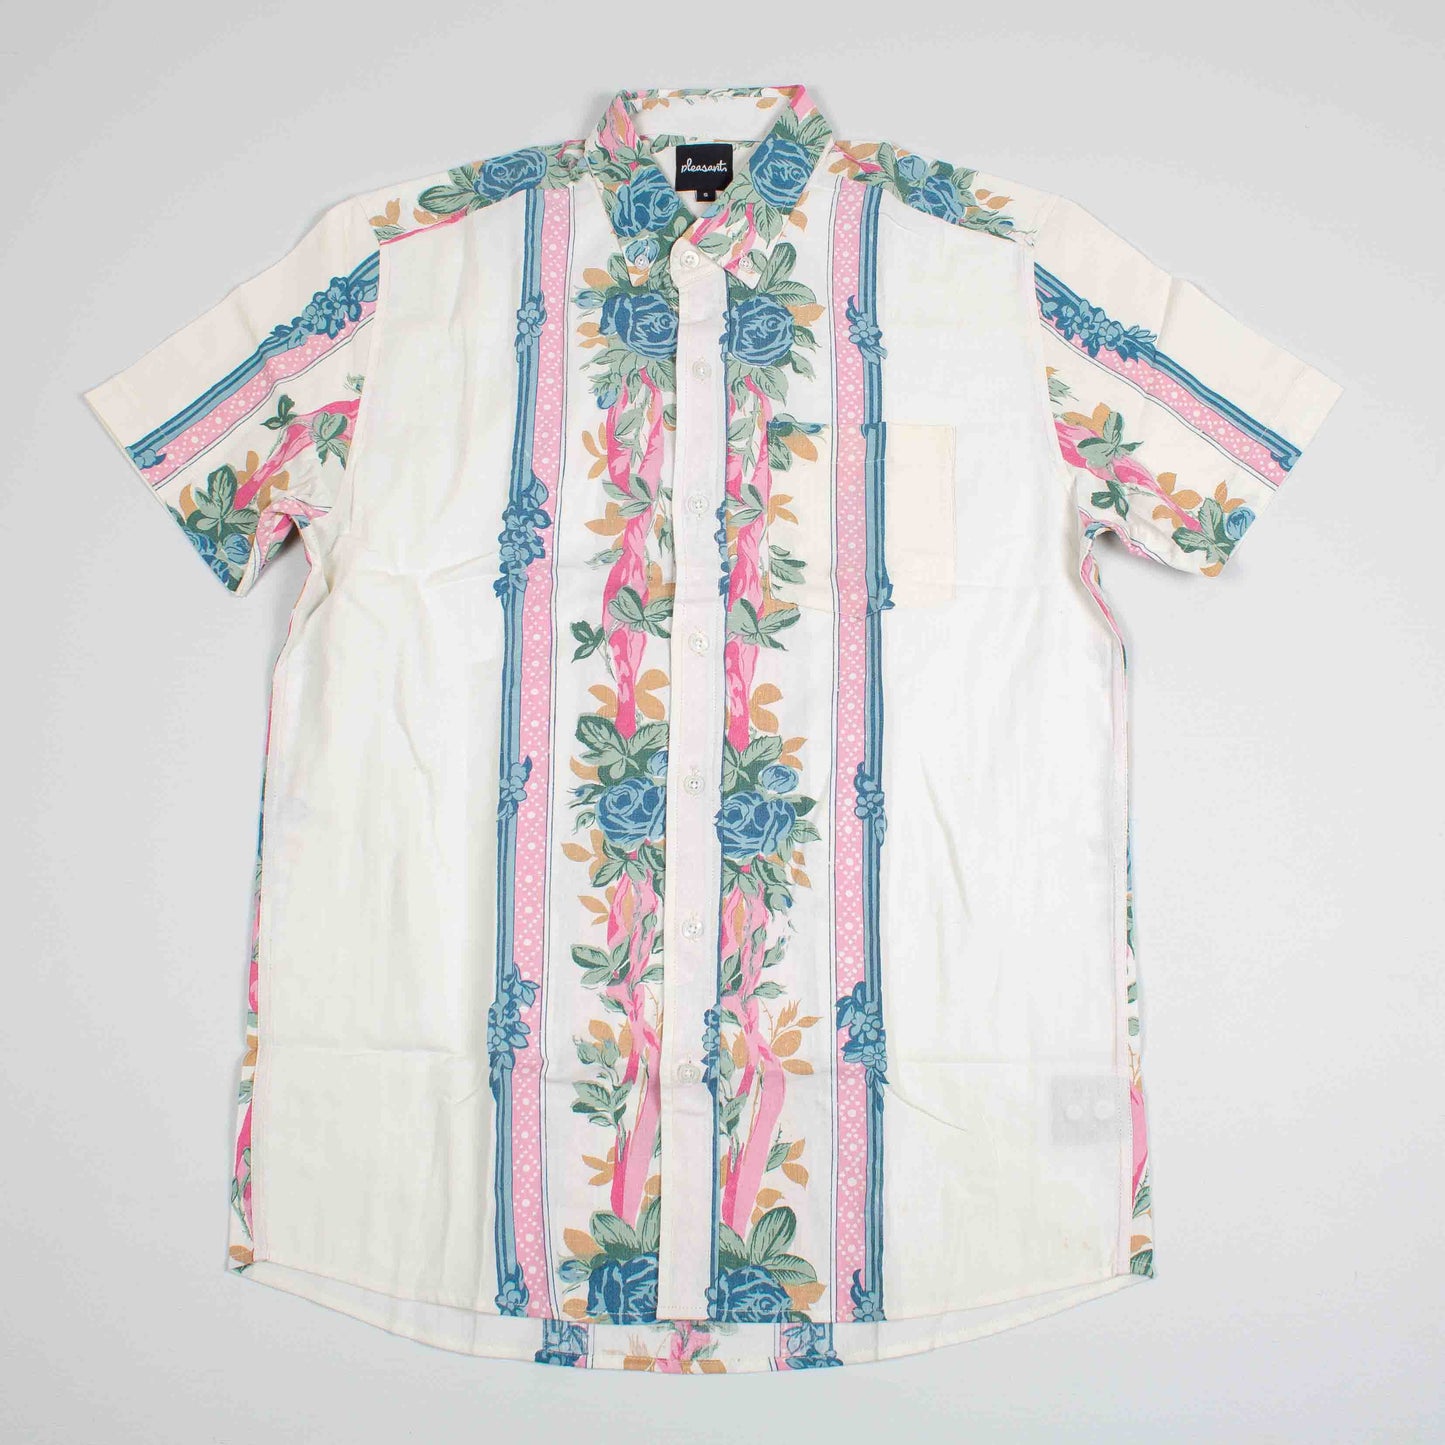 Temple flowers upcycled shirt